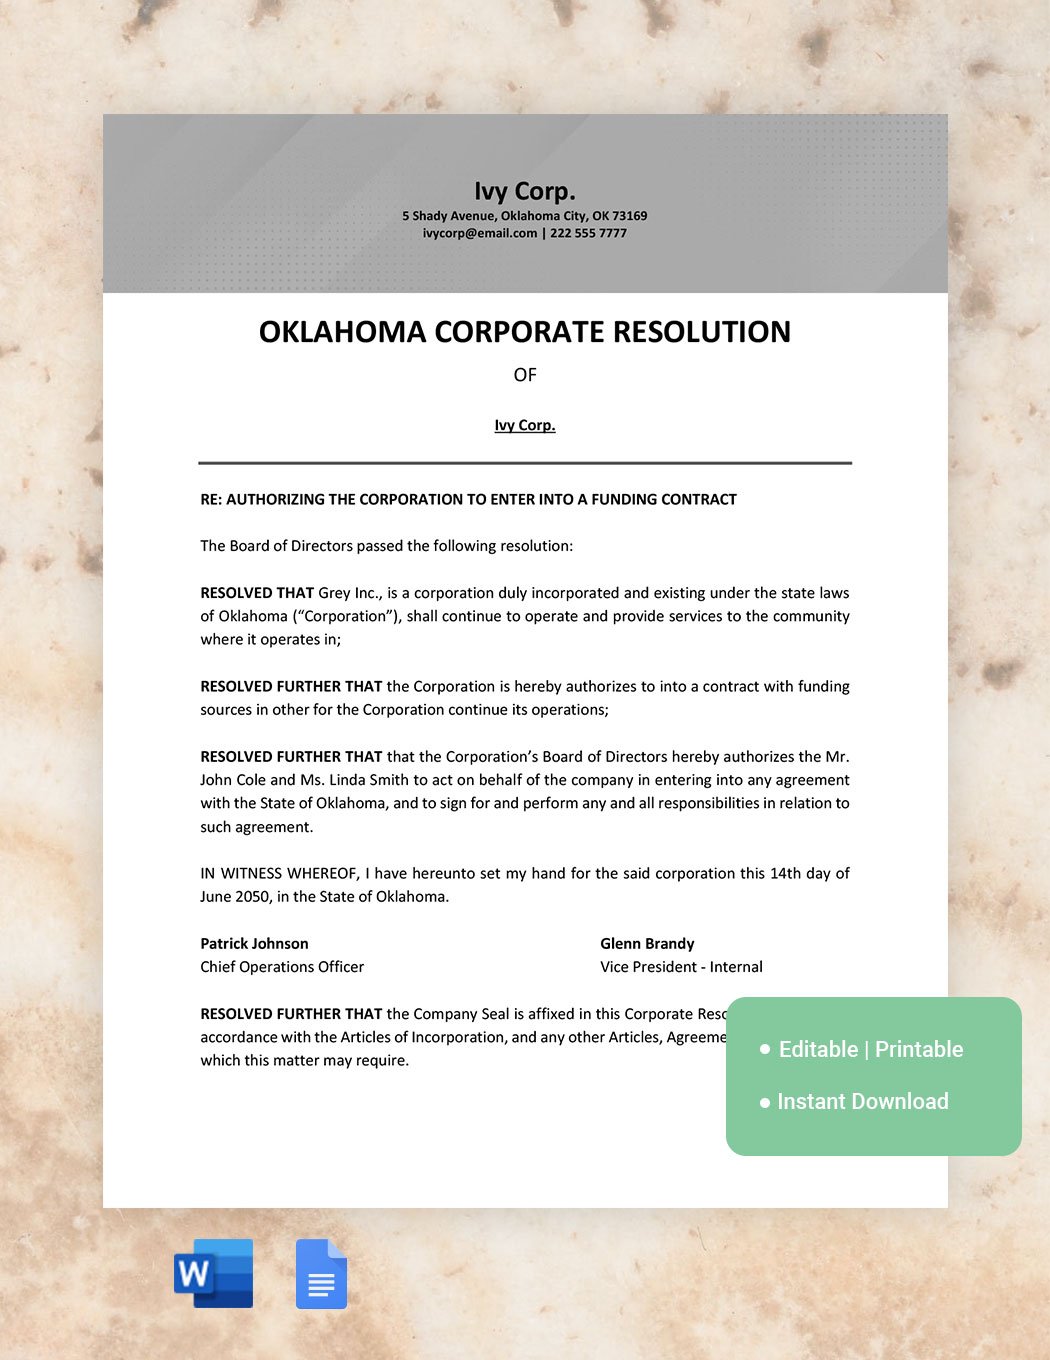 Oklahoma Corporate Resolution Template in Word, Google Docs